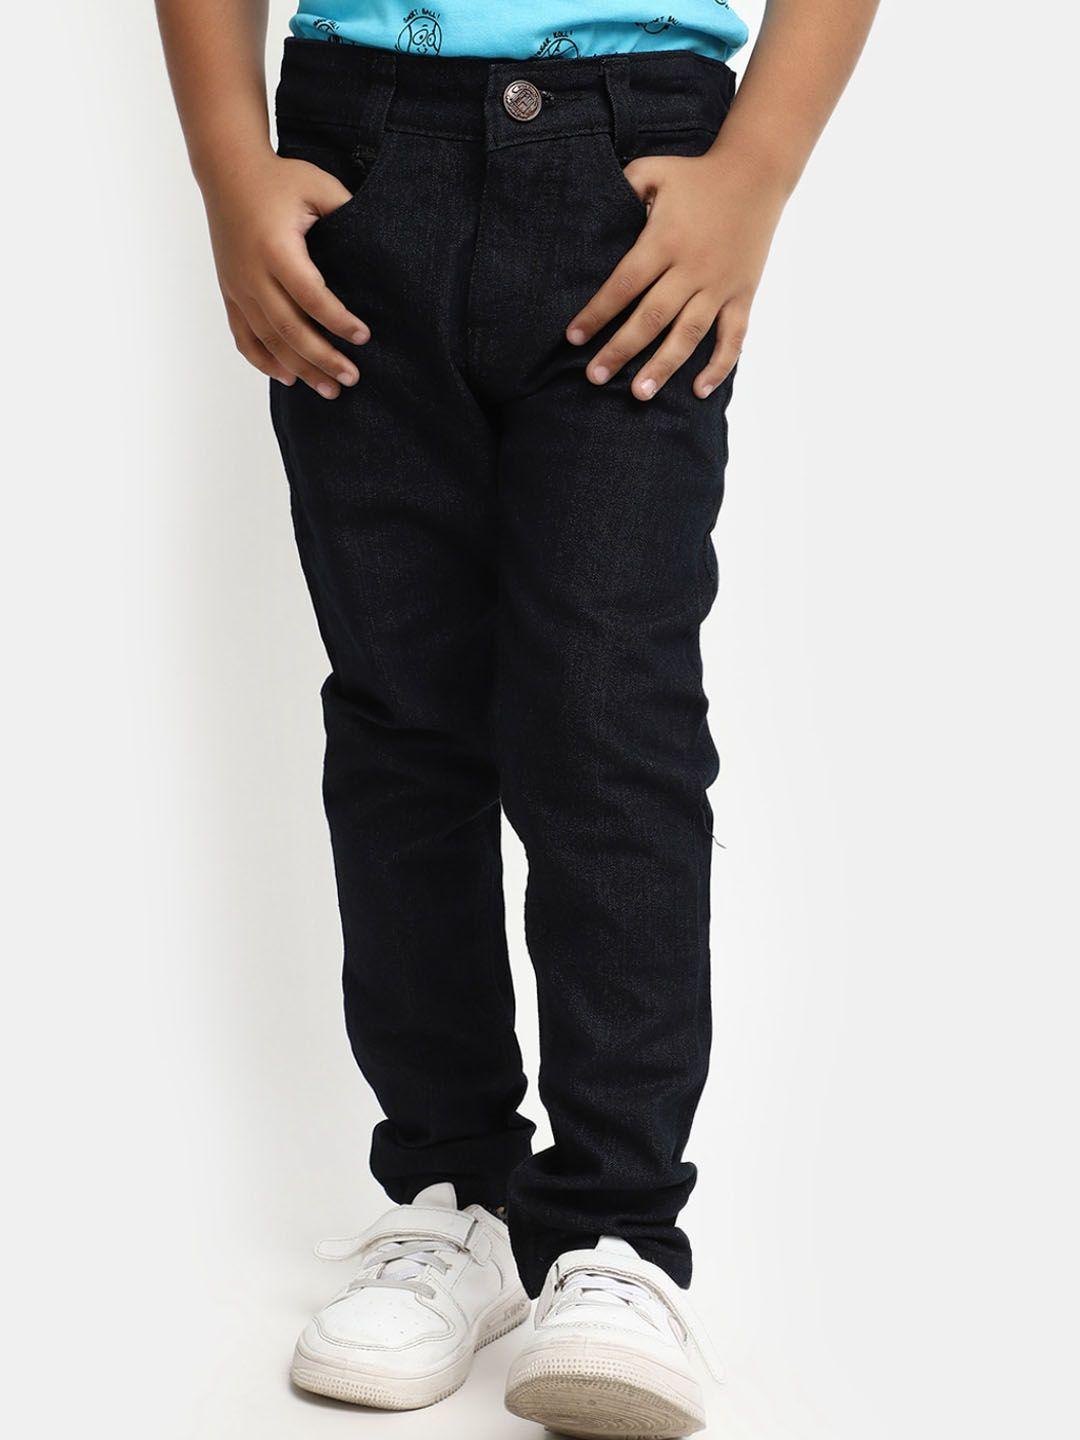 v-mart boys clean look knitted denim stretchable jeans